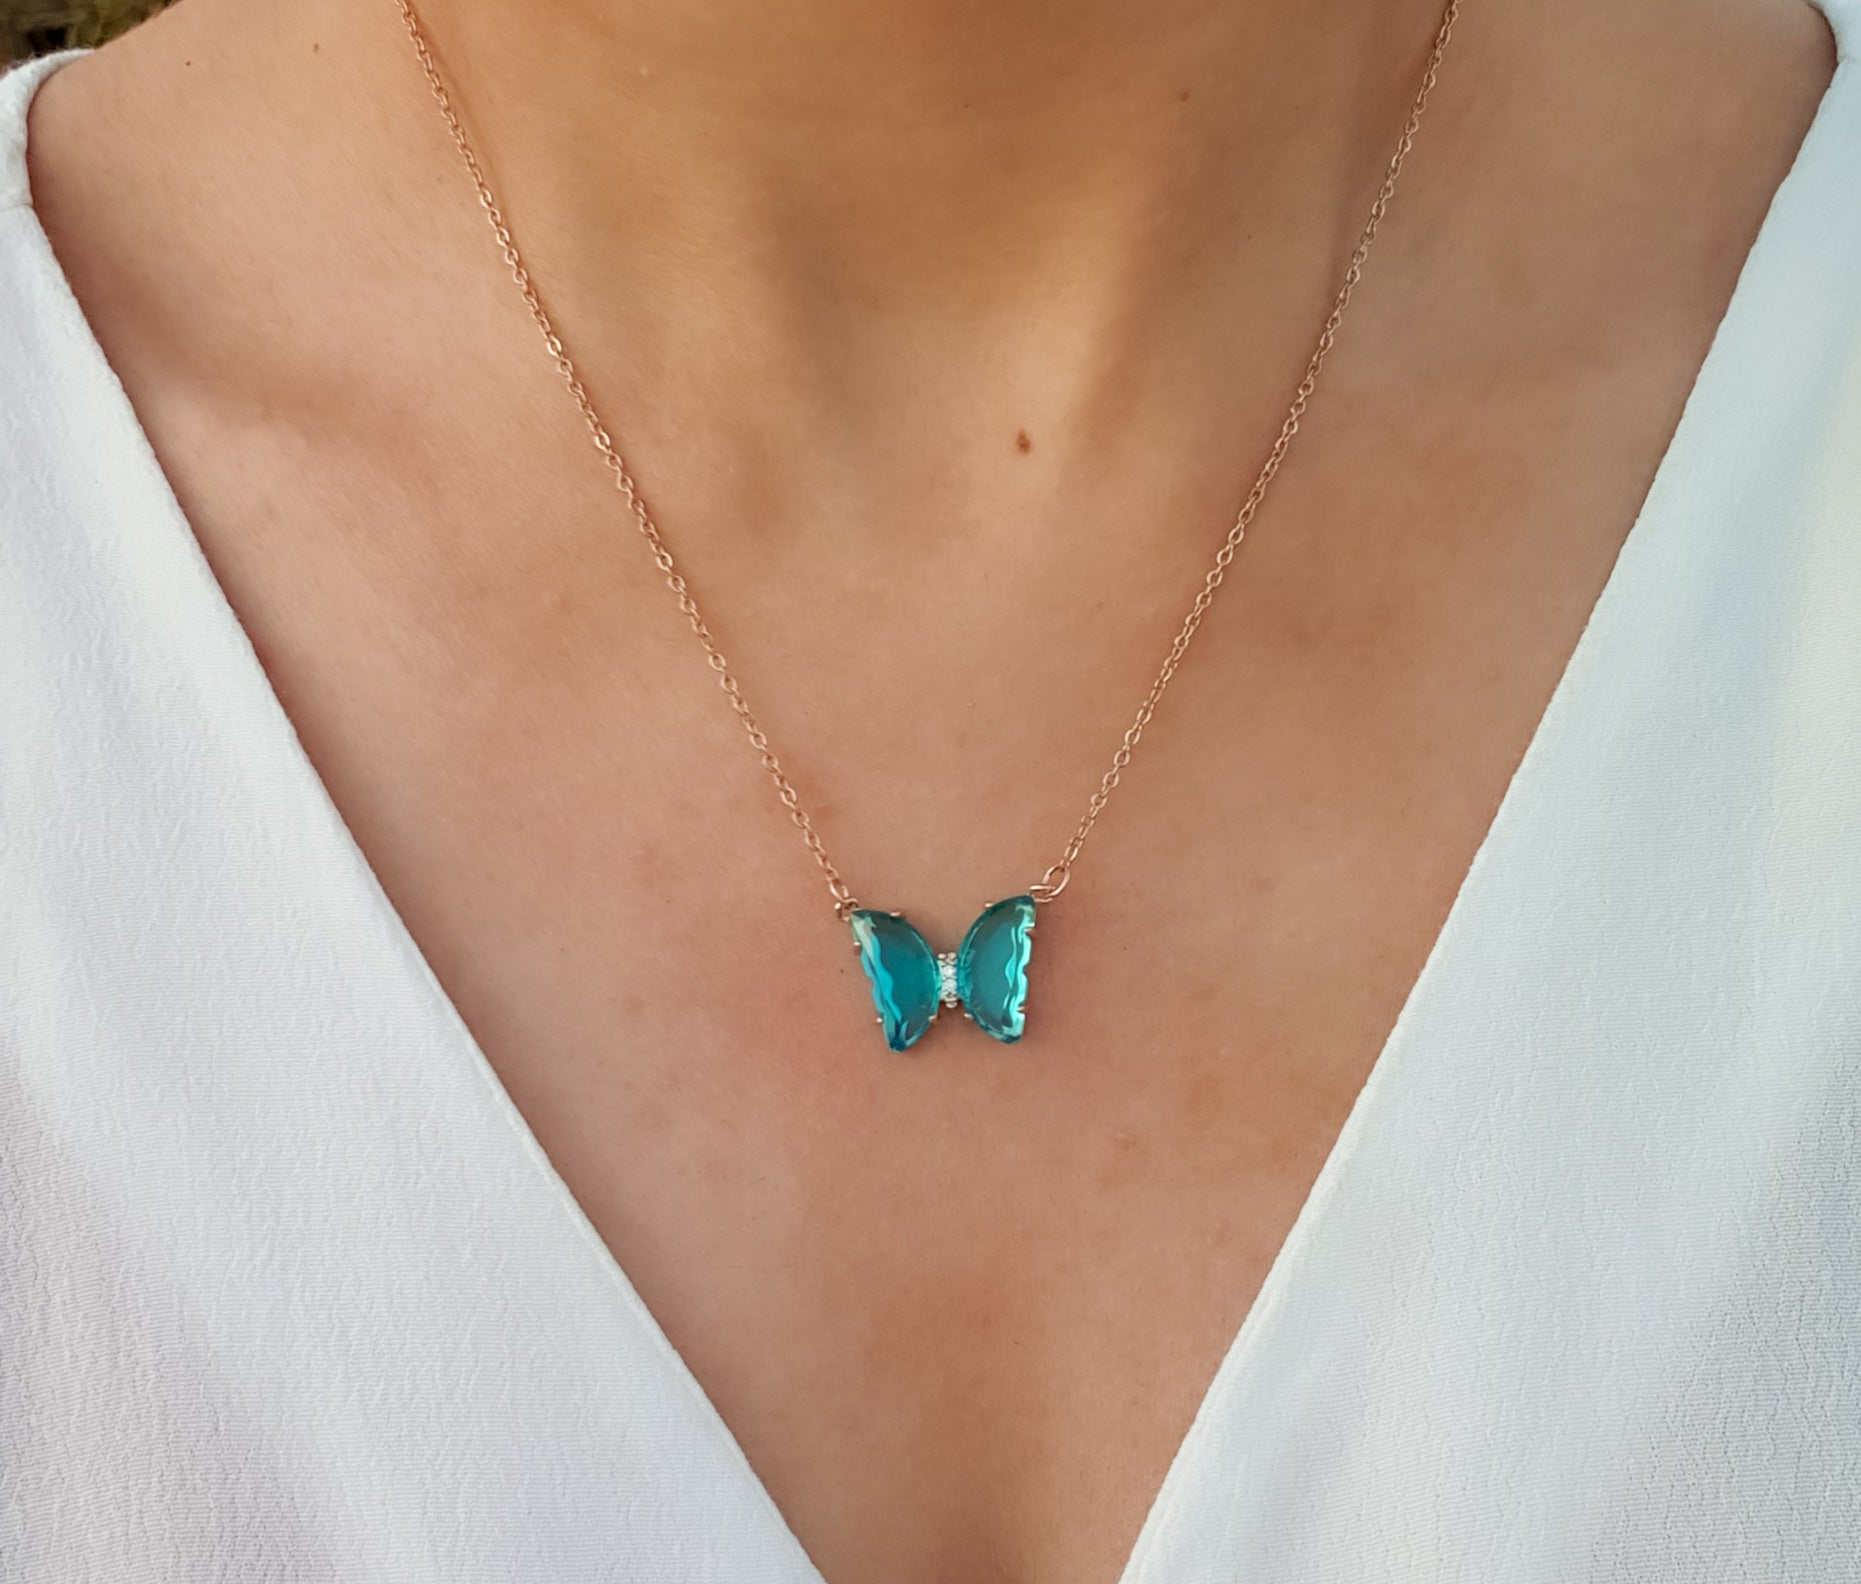 Mini Butterfly Necklace With Diamonds & Prongs In Turquoise Opal | KAMARIA  | Wolf & Badger